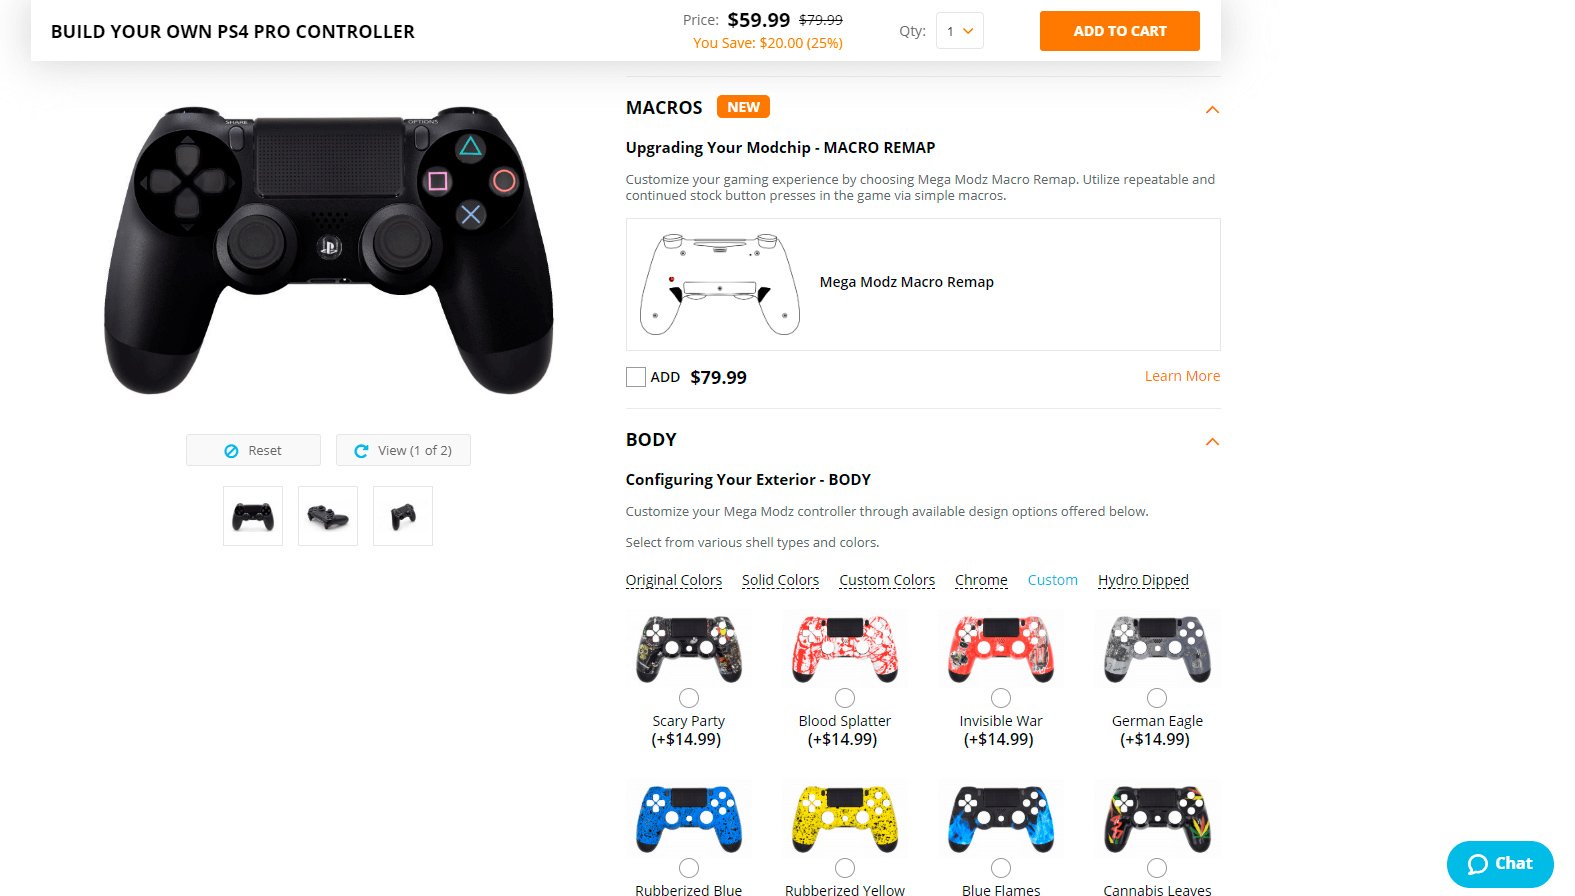 Build Build Your Own PS4  - CONTROLLER DESIGN & CUSTOMIZATION